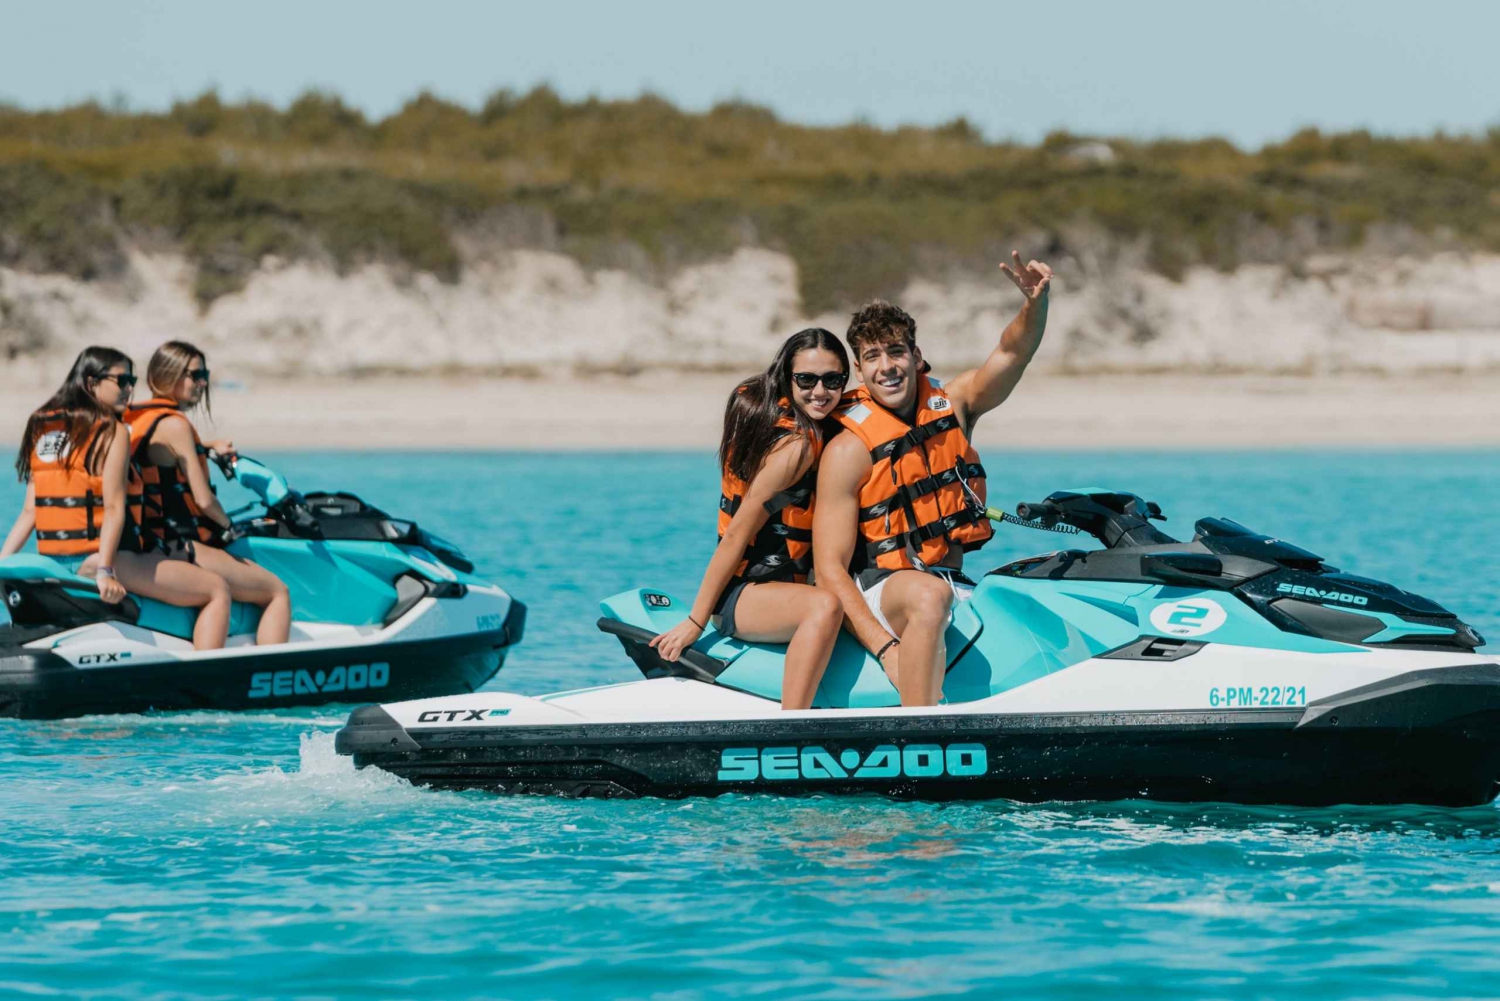 Can Picafort: Guided Alcudia Bay Jet Ski Tour with Photos